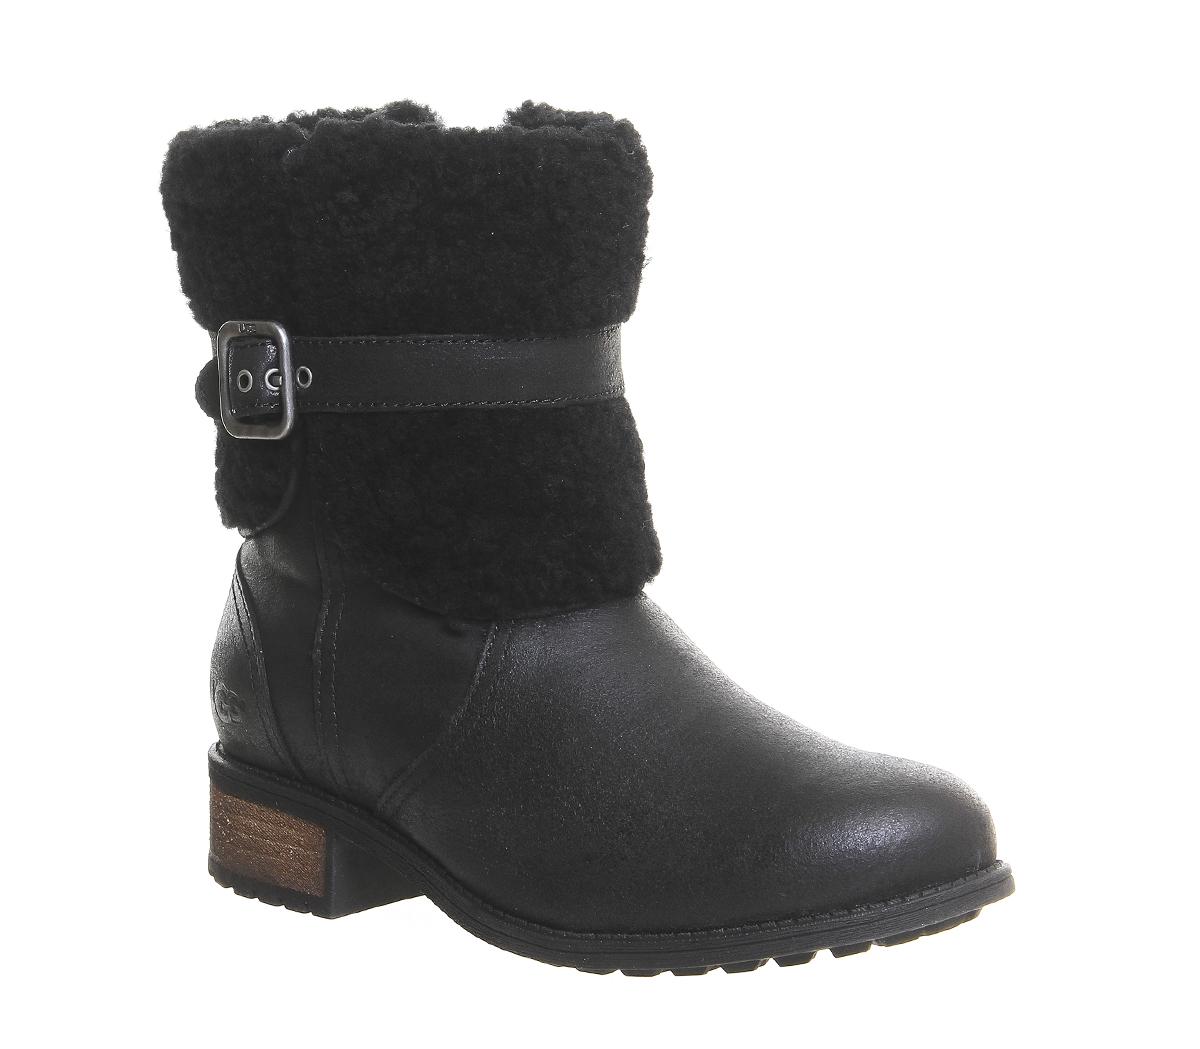 UGG Blayre II Shearling Boots Black Leather - Ankle Boots